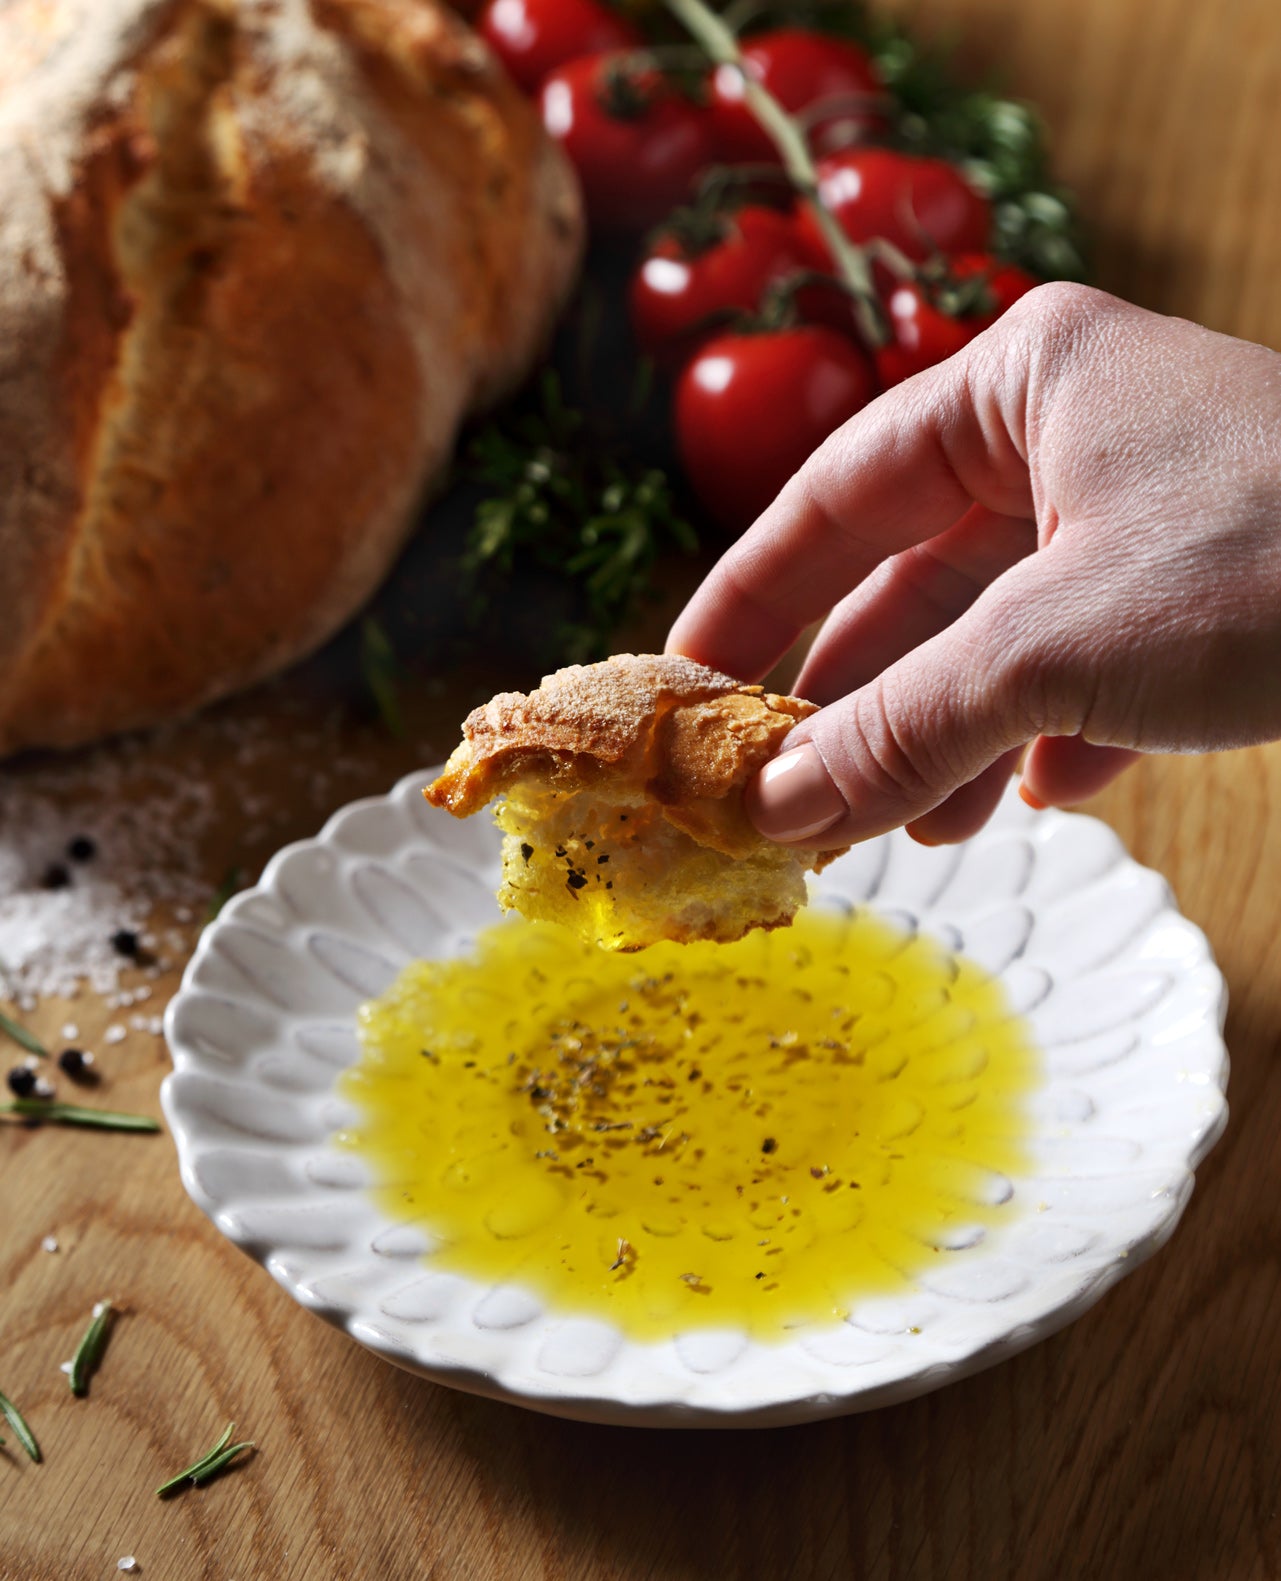 A kitchen table with a plate filled with olive oil and a hand dipping a slice of bread.